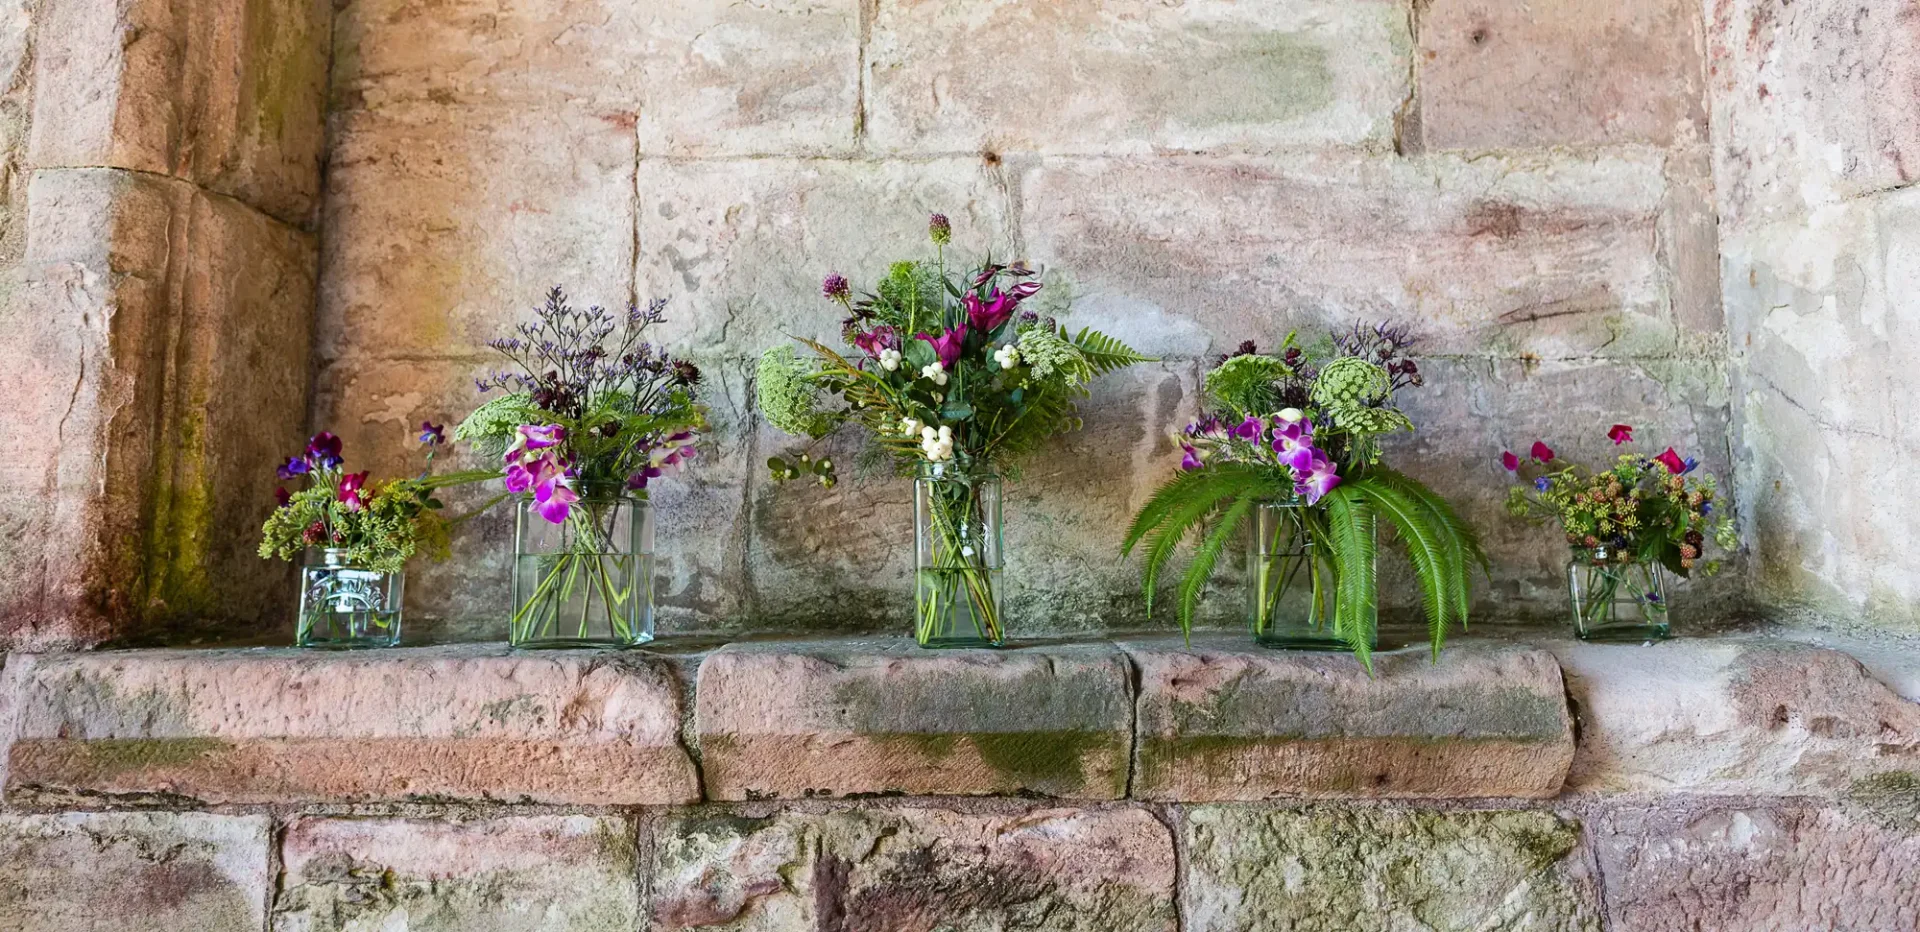 Five assorted flower arrangements in glass vases on a weathered stone ledge.